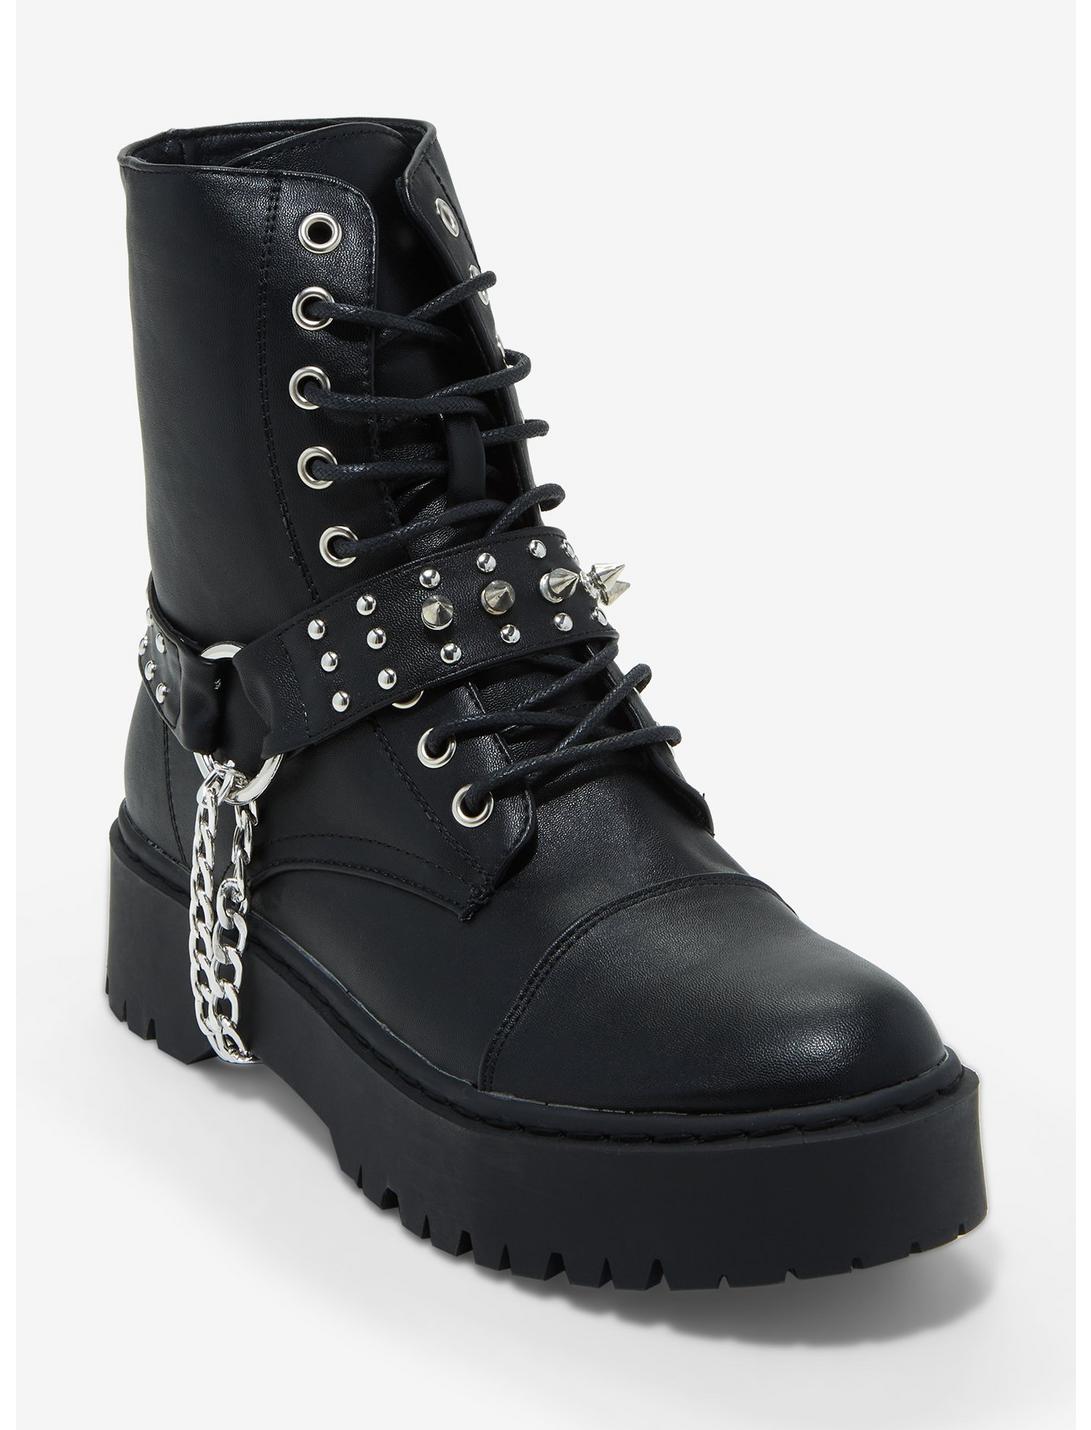 Black Spike & Chain Combat Boots | Hot Topic